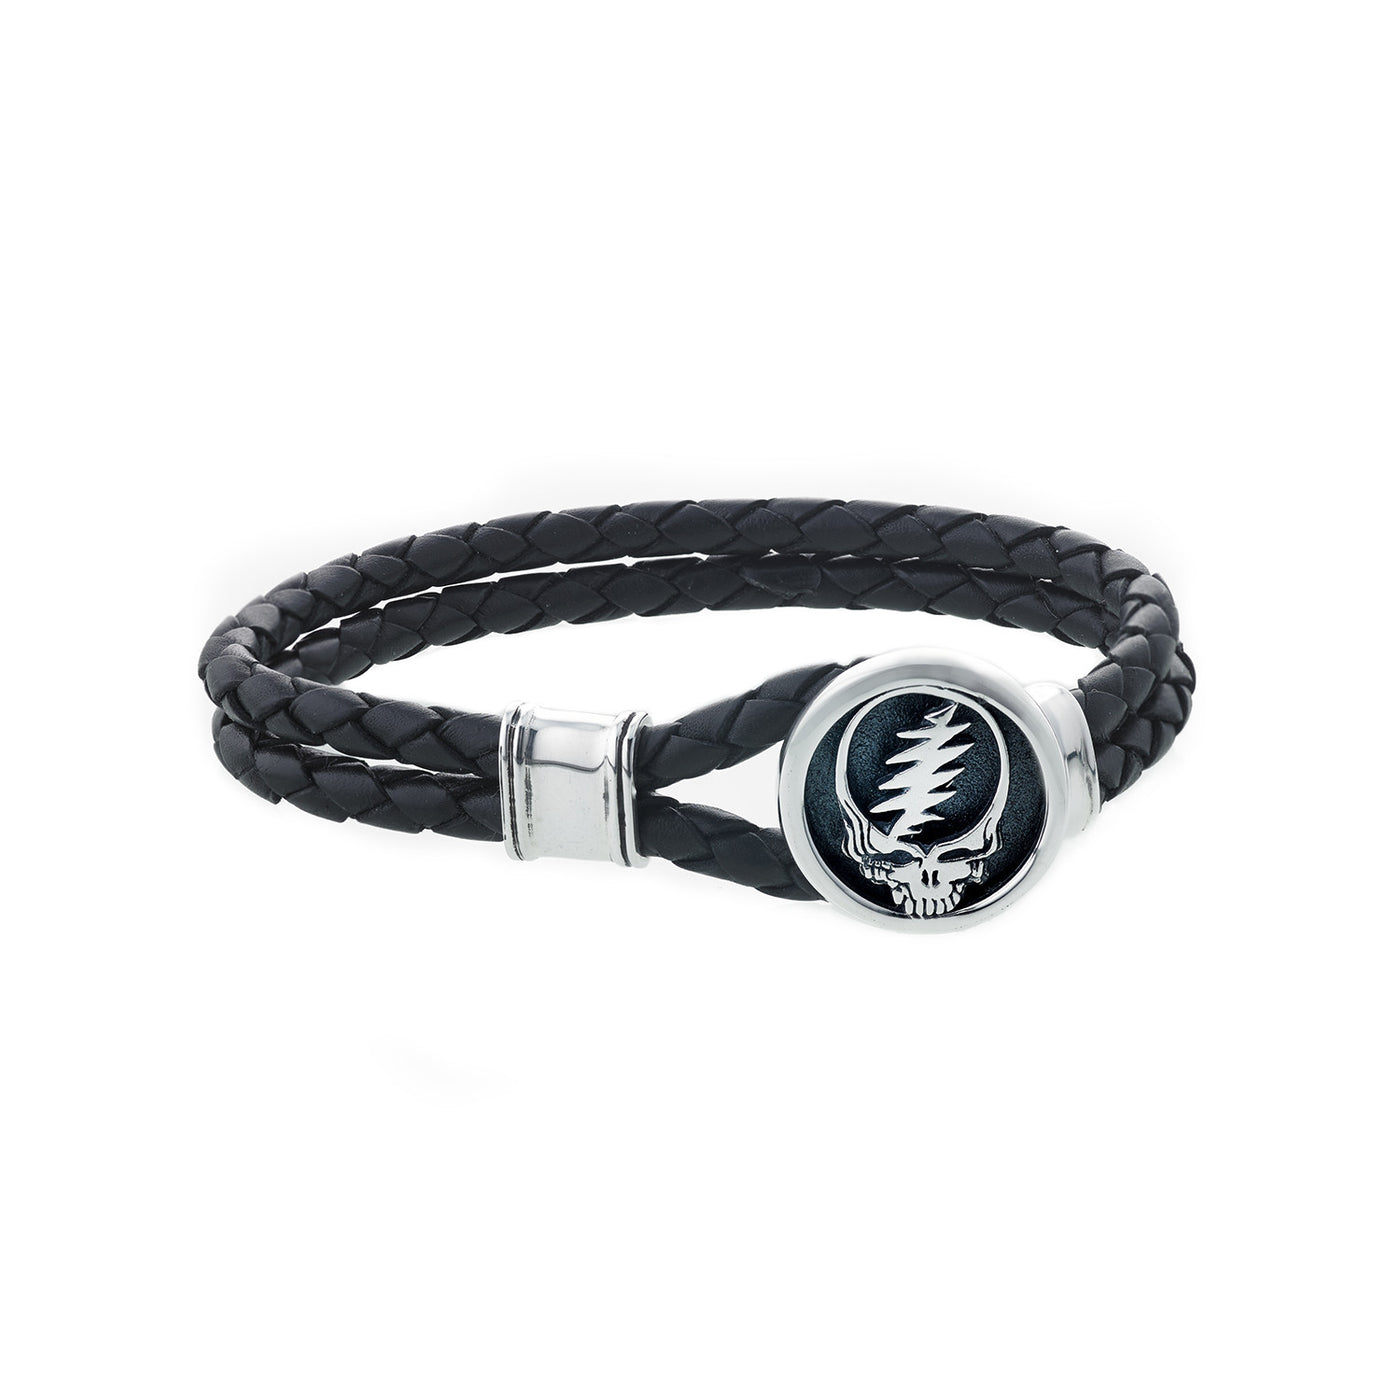 Steal Your Face Sterling Silver Leather Bracelet - Cynthia Gale New York - 2